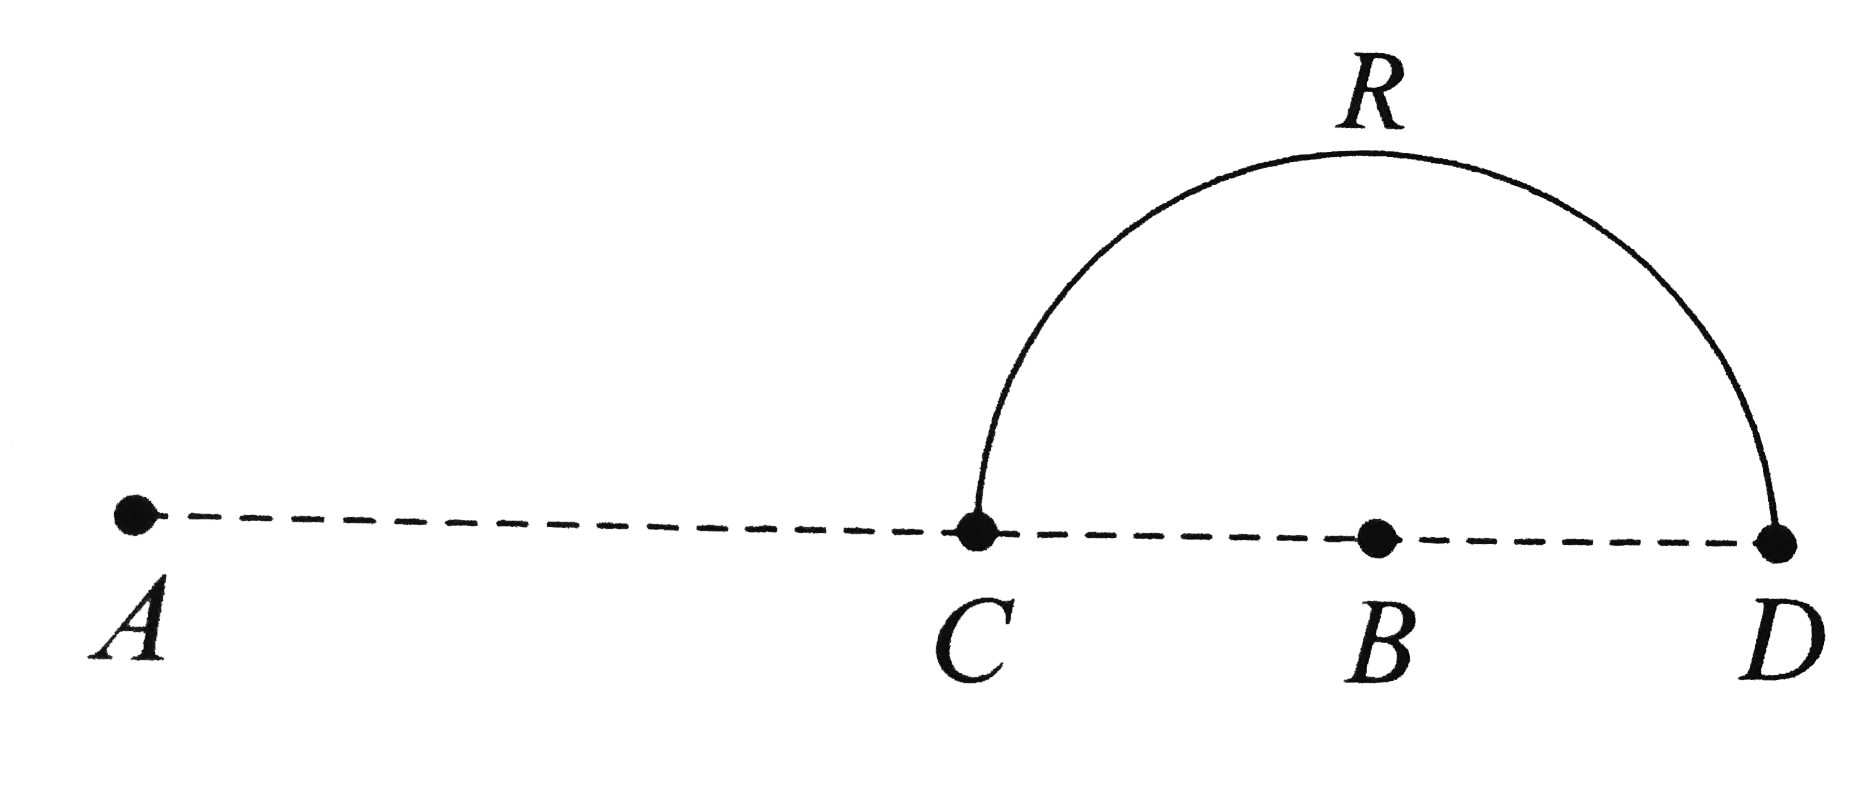 Charges +q and -q are placed at points A and B respectively which are a distance 2L apart, C is the midpoint between A and B. The work done in moving a charge +Q along the semicircle CRD is